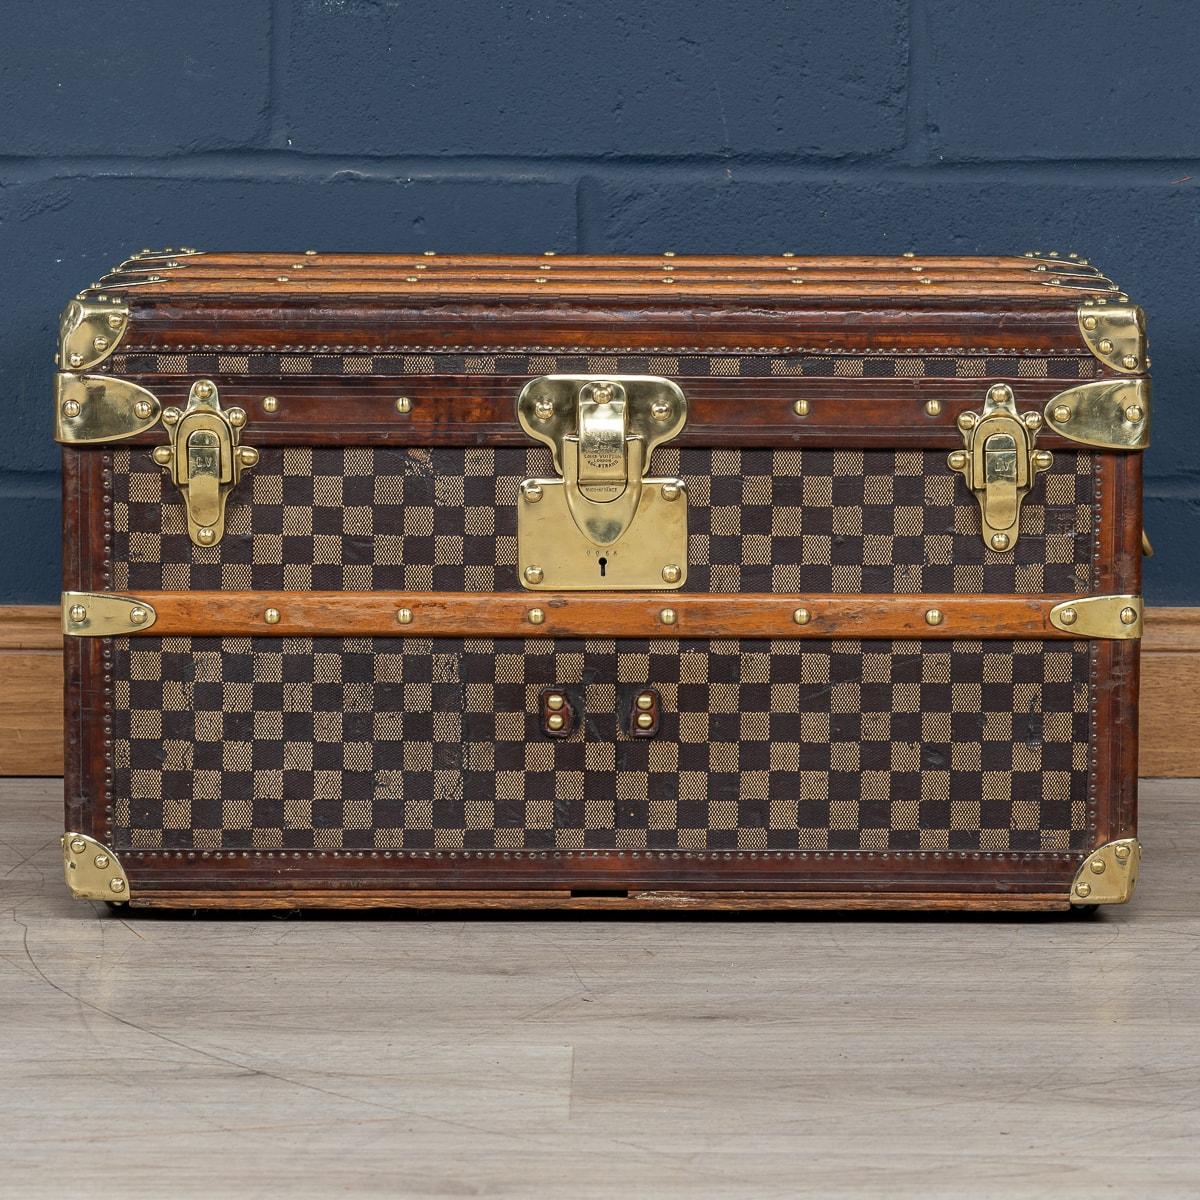 One of the rarest Louis Vuitton trunks to be offered, this trunk is covered in the world famous damier (checkerboard) canvas. Known as the shirt trunk, it is a diminutive size and an extremely rare item to find in such good condition especially when